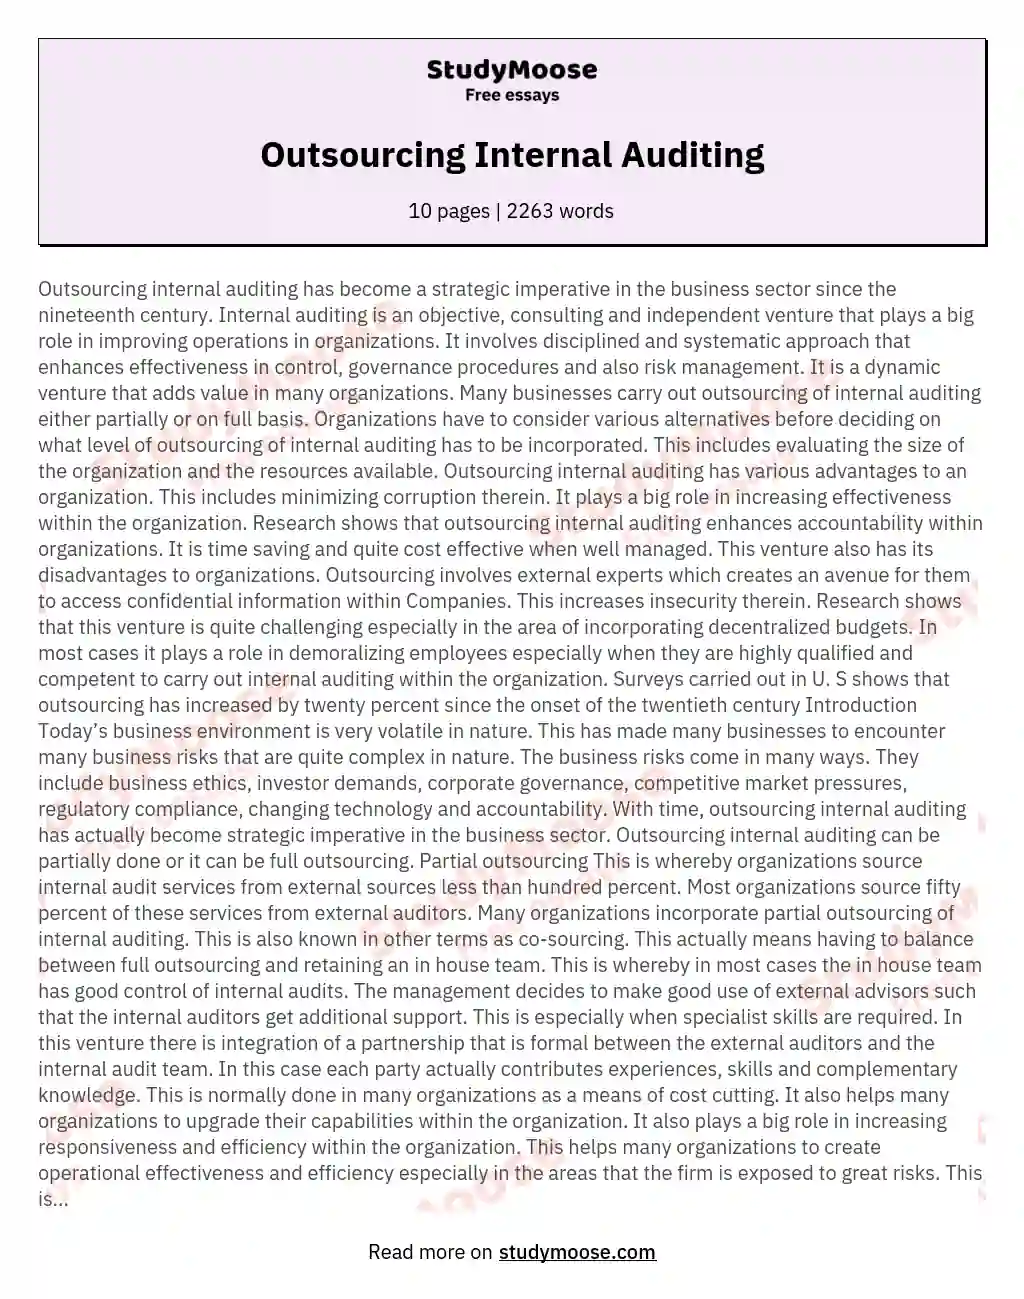 Outsourcing Internal Auditing essay